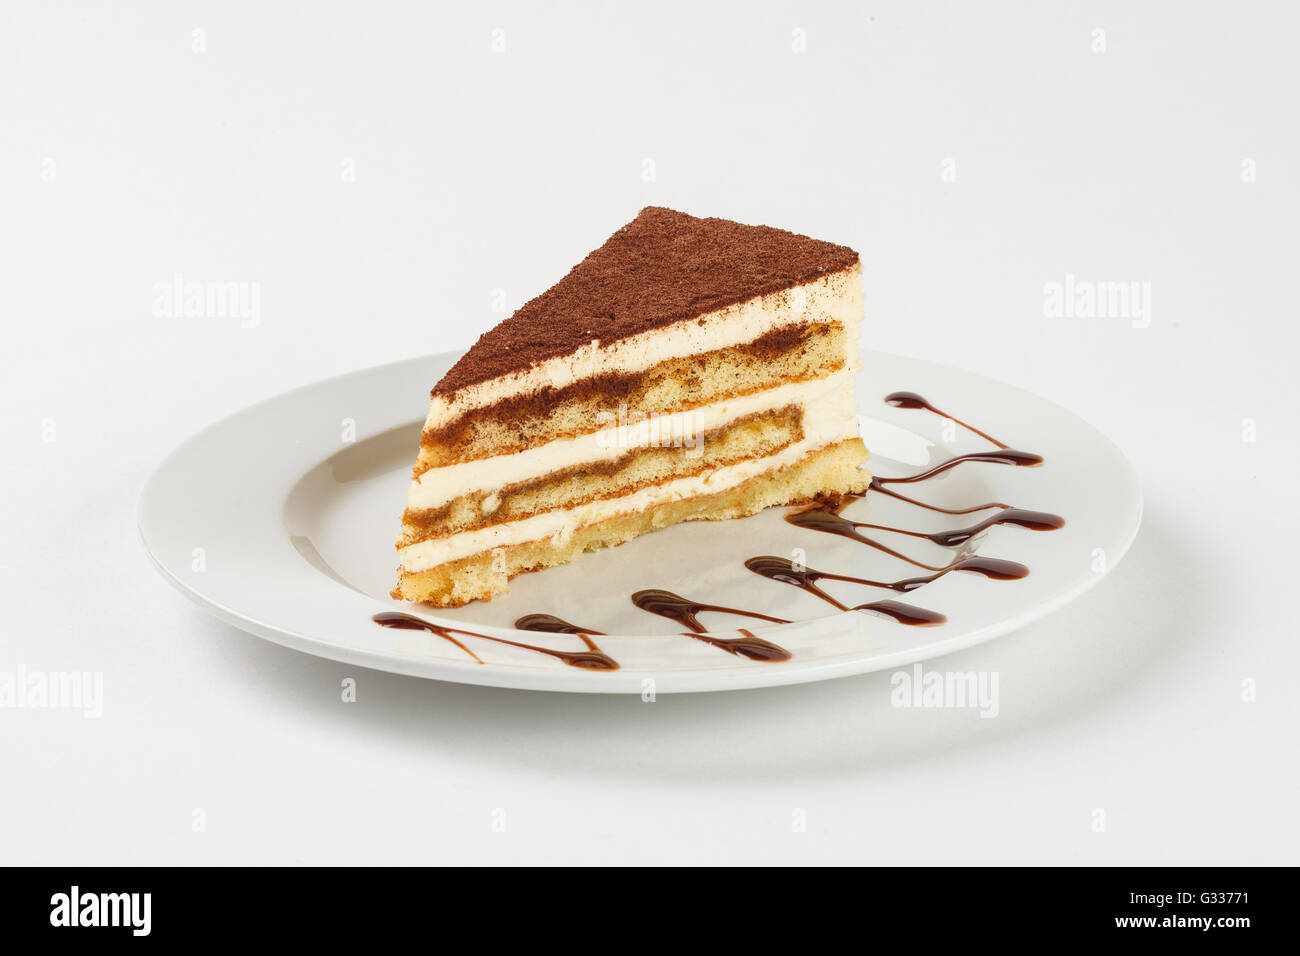 Delicious chocolate cream cake on the plate on white background. Close up side view. Stock Photo